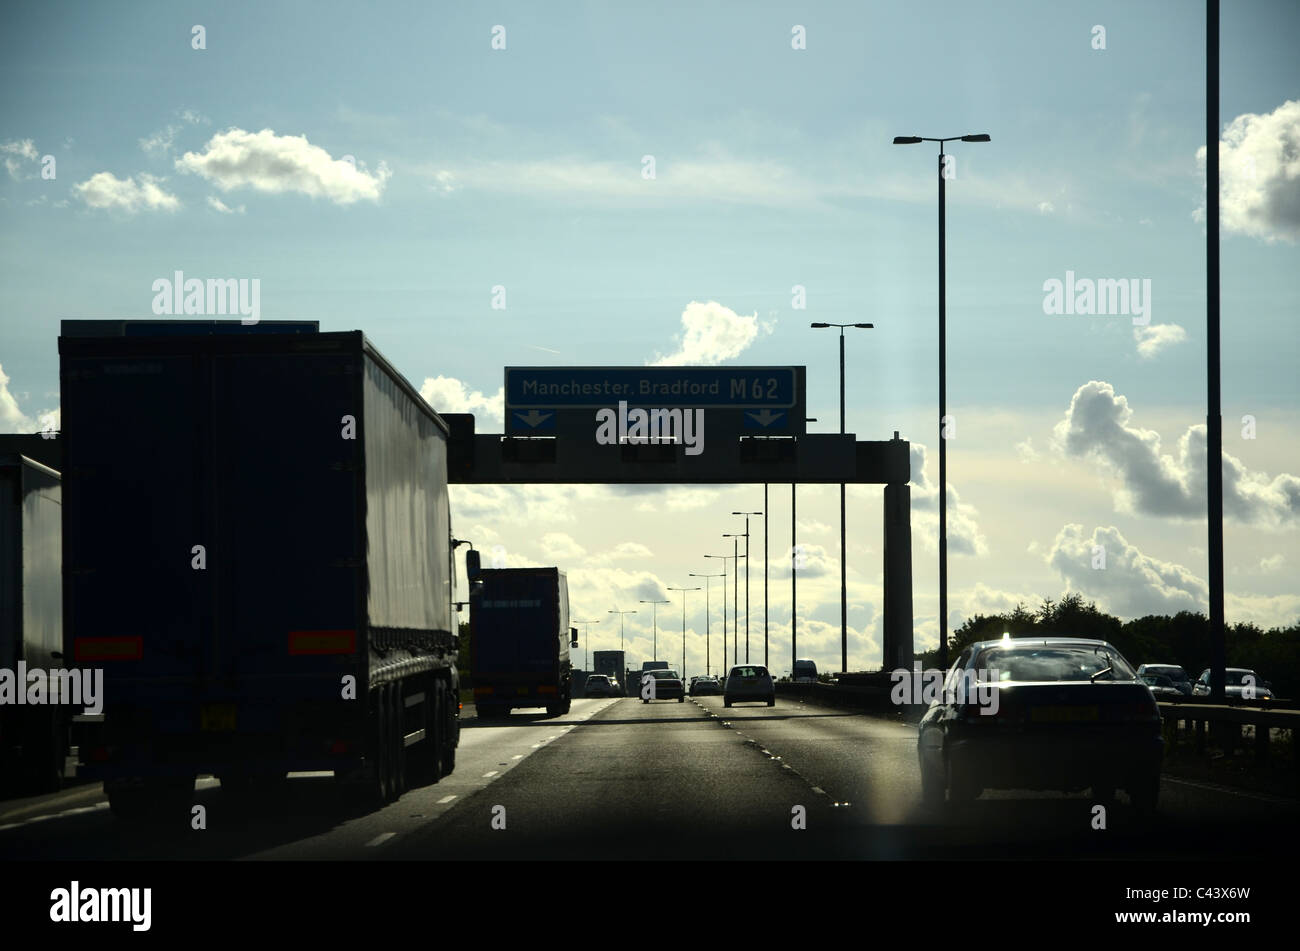 Driver's view of the M62 motorway with traffic, lamp posts and signage in silhouette against a bright blue cloudy sky Stock Photo